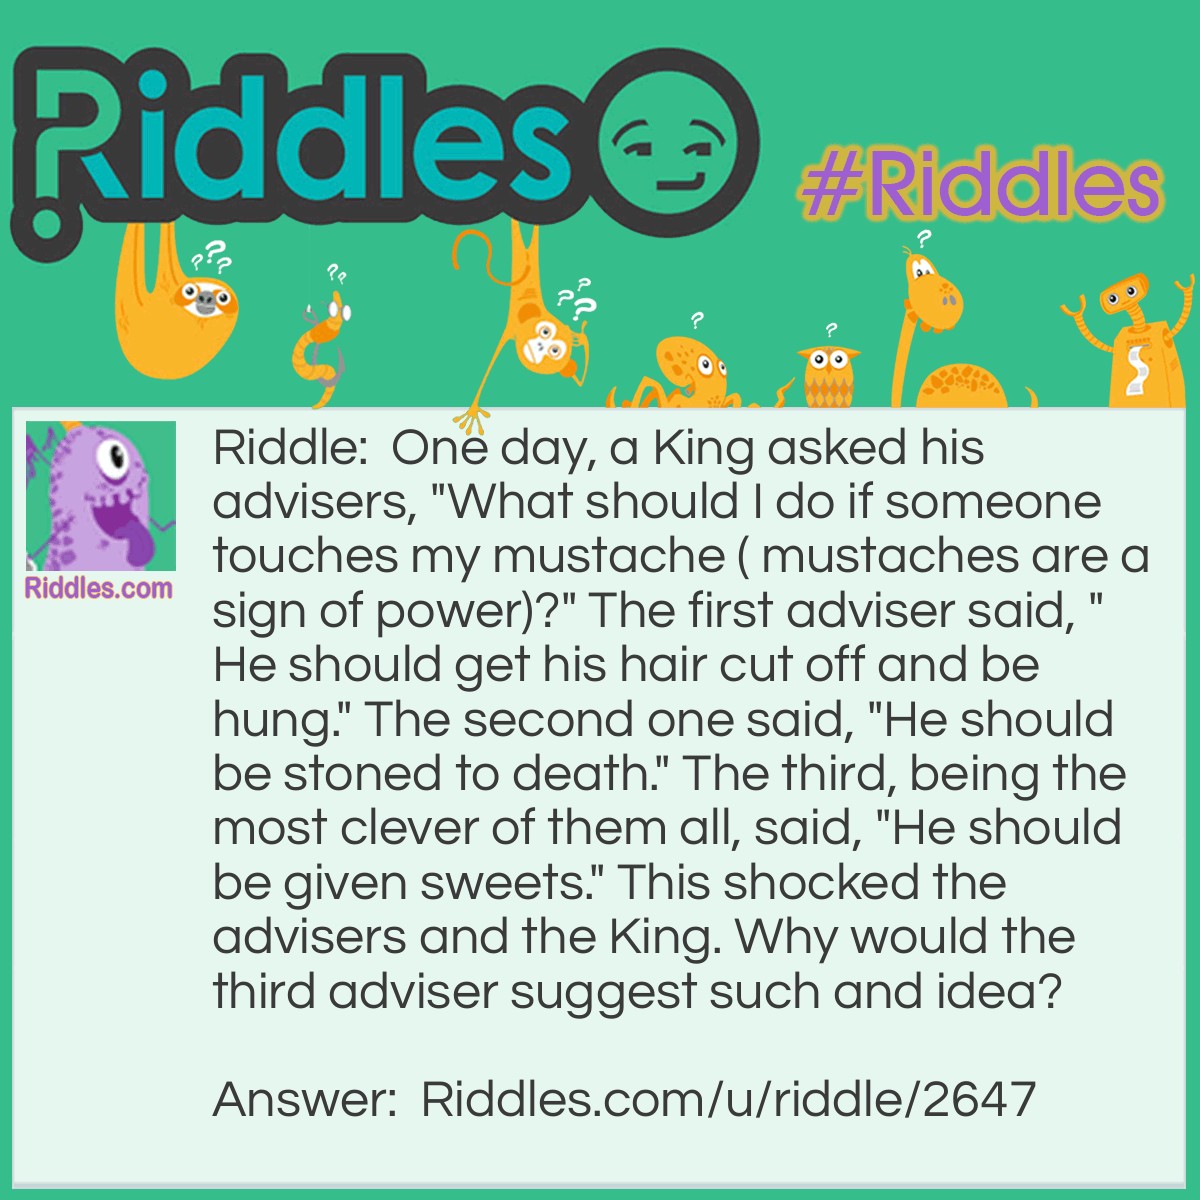 Riddle: One day, a King asked his advisers, "What should I do if someone touches my mustache ( mustaches are a sign of power)?" The first adviser said, "He should get his hair cut off and be hung." The second one said, "He should be stoned to death." The third, being the most clever of them all, said, "He should be given sweets." This shocked the advisers and the King. Why would the third adviser suggest such and idea? Answer: Since mustaches are a sign of power, the only ones daring enough to touch someone's mustache, especially the King's, would be a child.